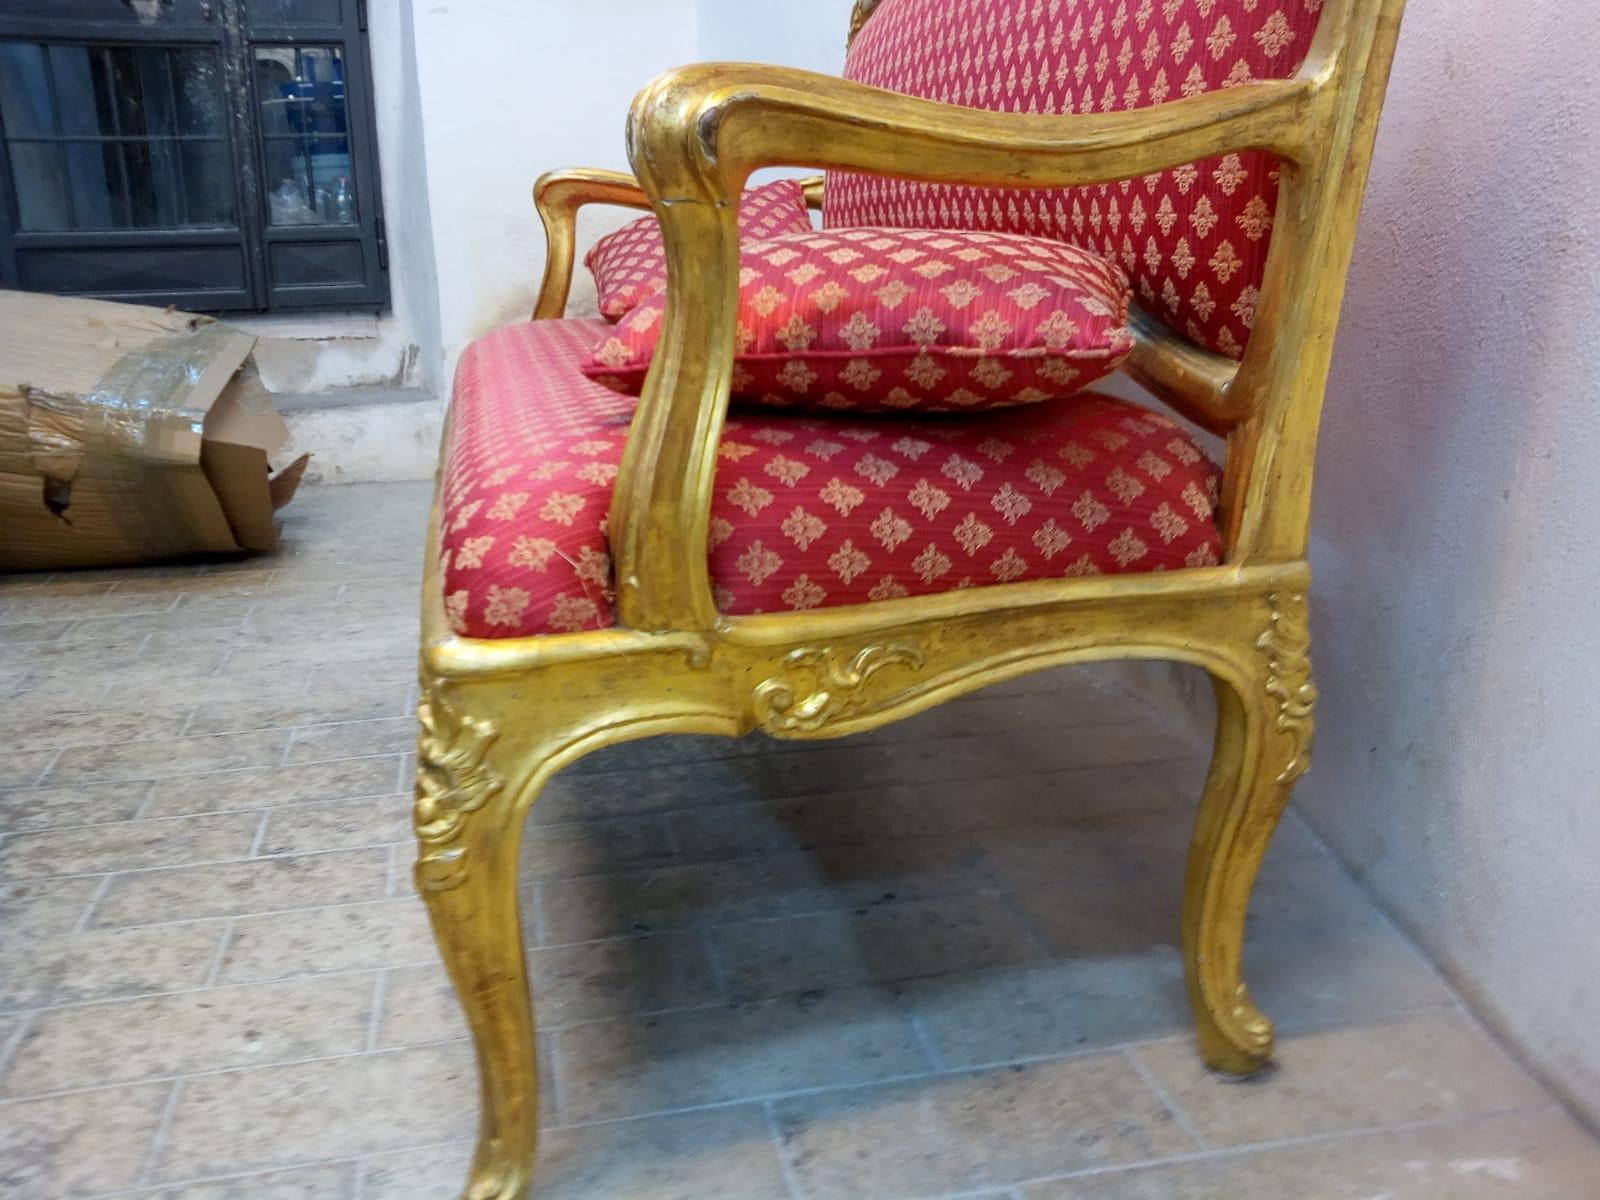 19th Century Golden Hand Carved Sofa from the Louis Phillipe Period '1830-1848' For Sale 5